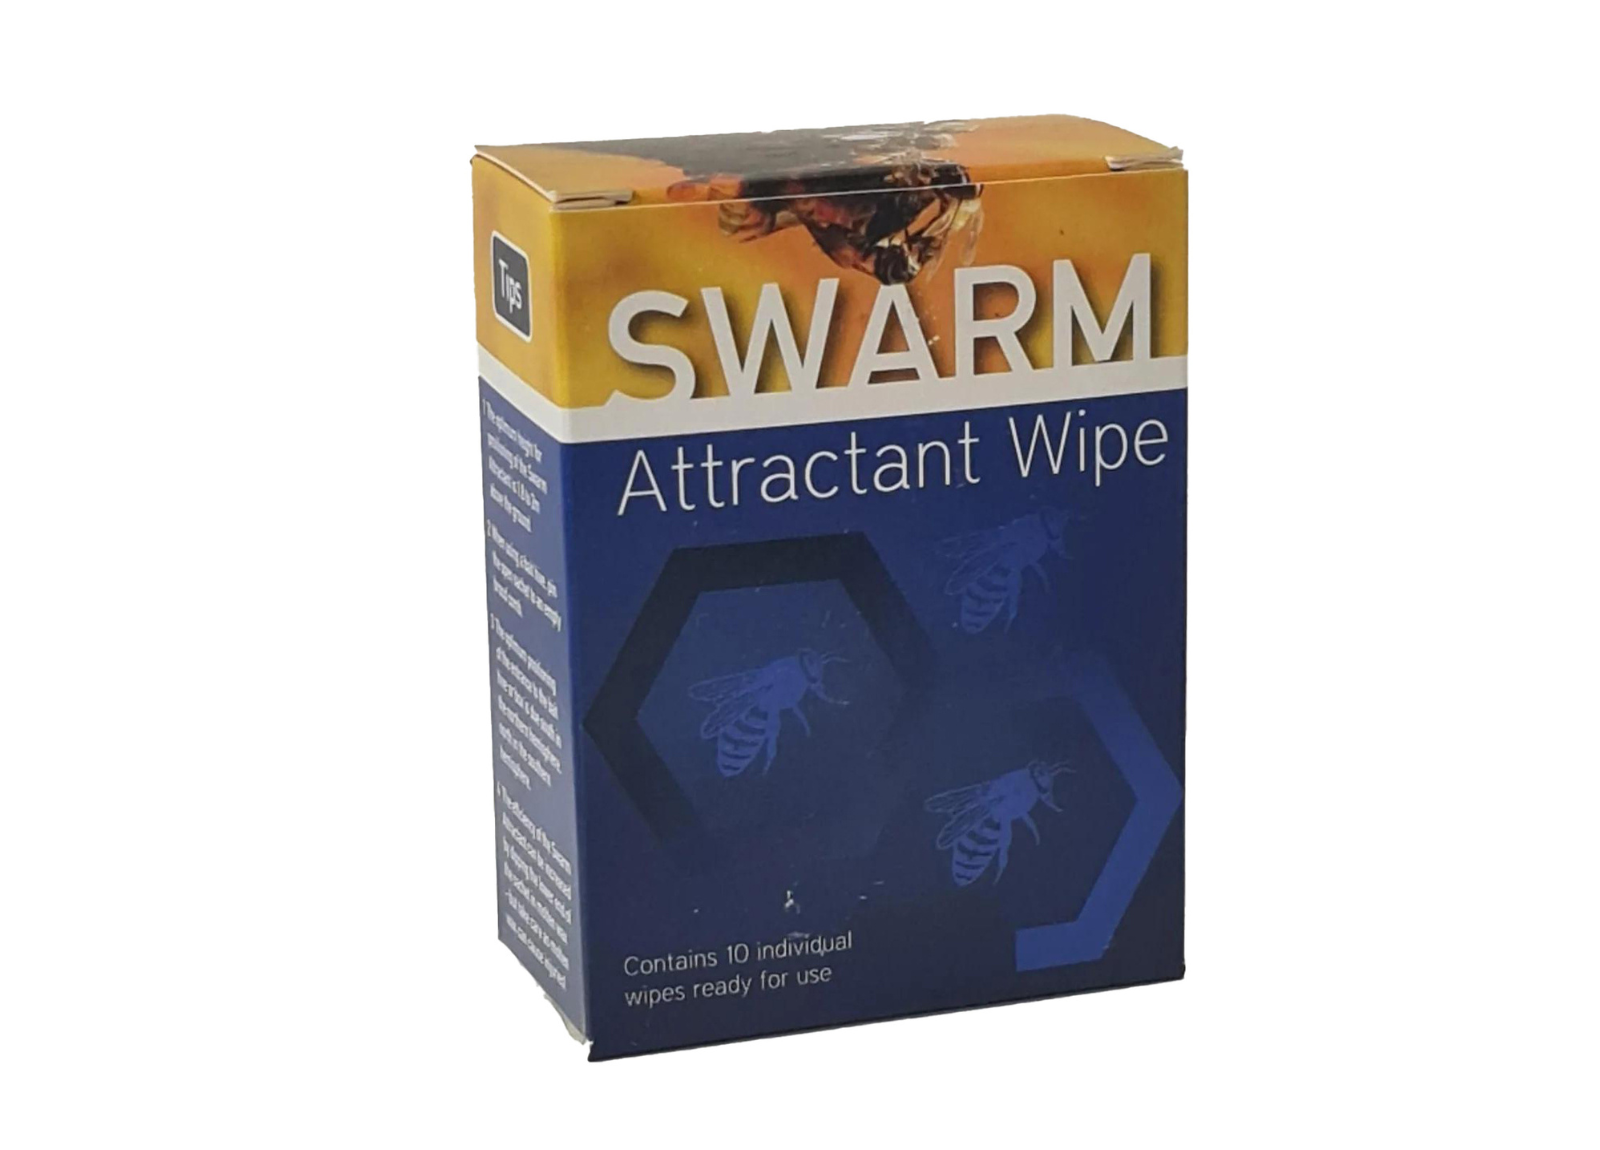 Swarm Lure Attractant, Made in the UK